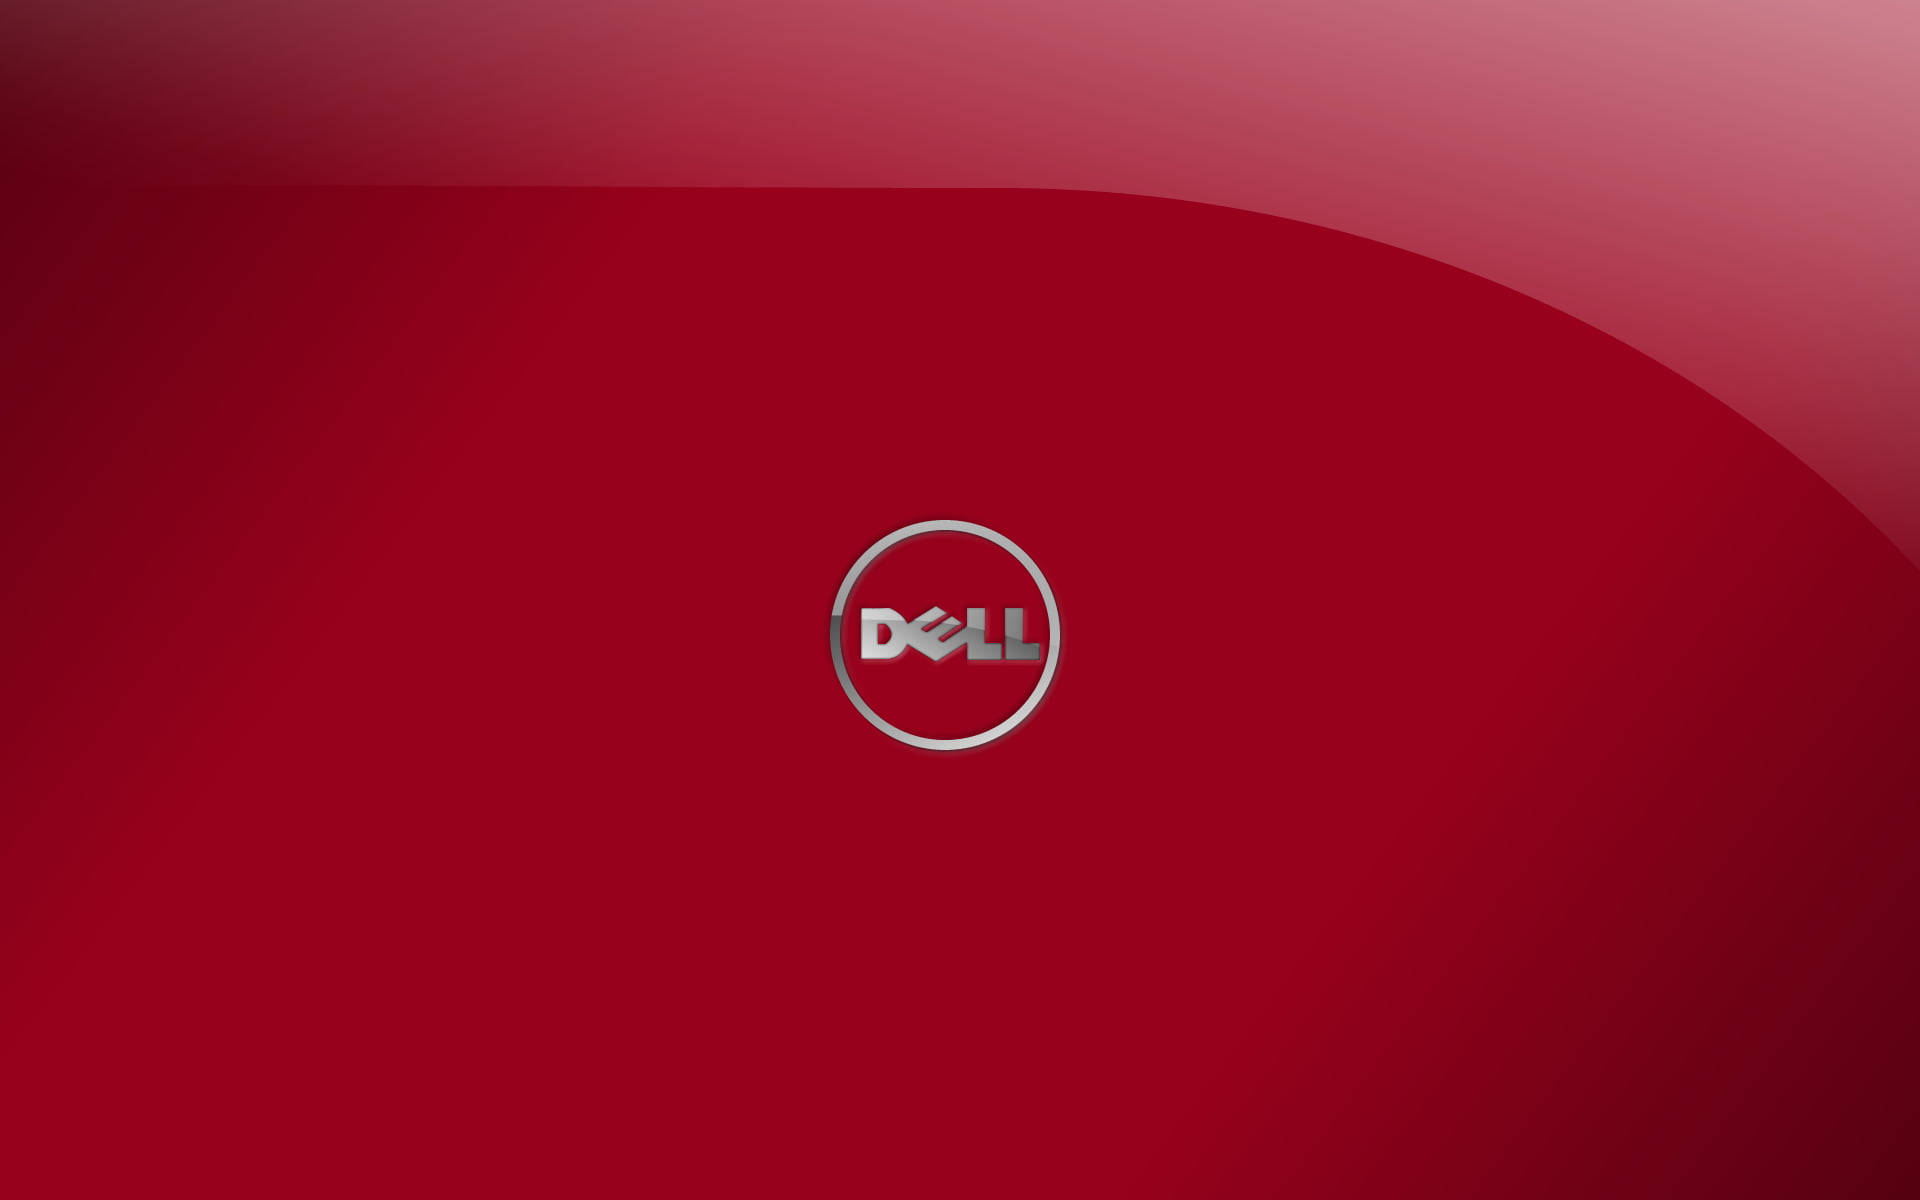 Silver Dell Laptop Logo On Red